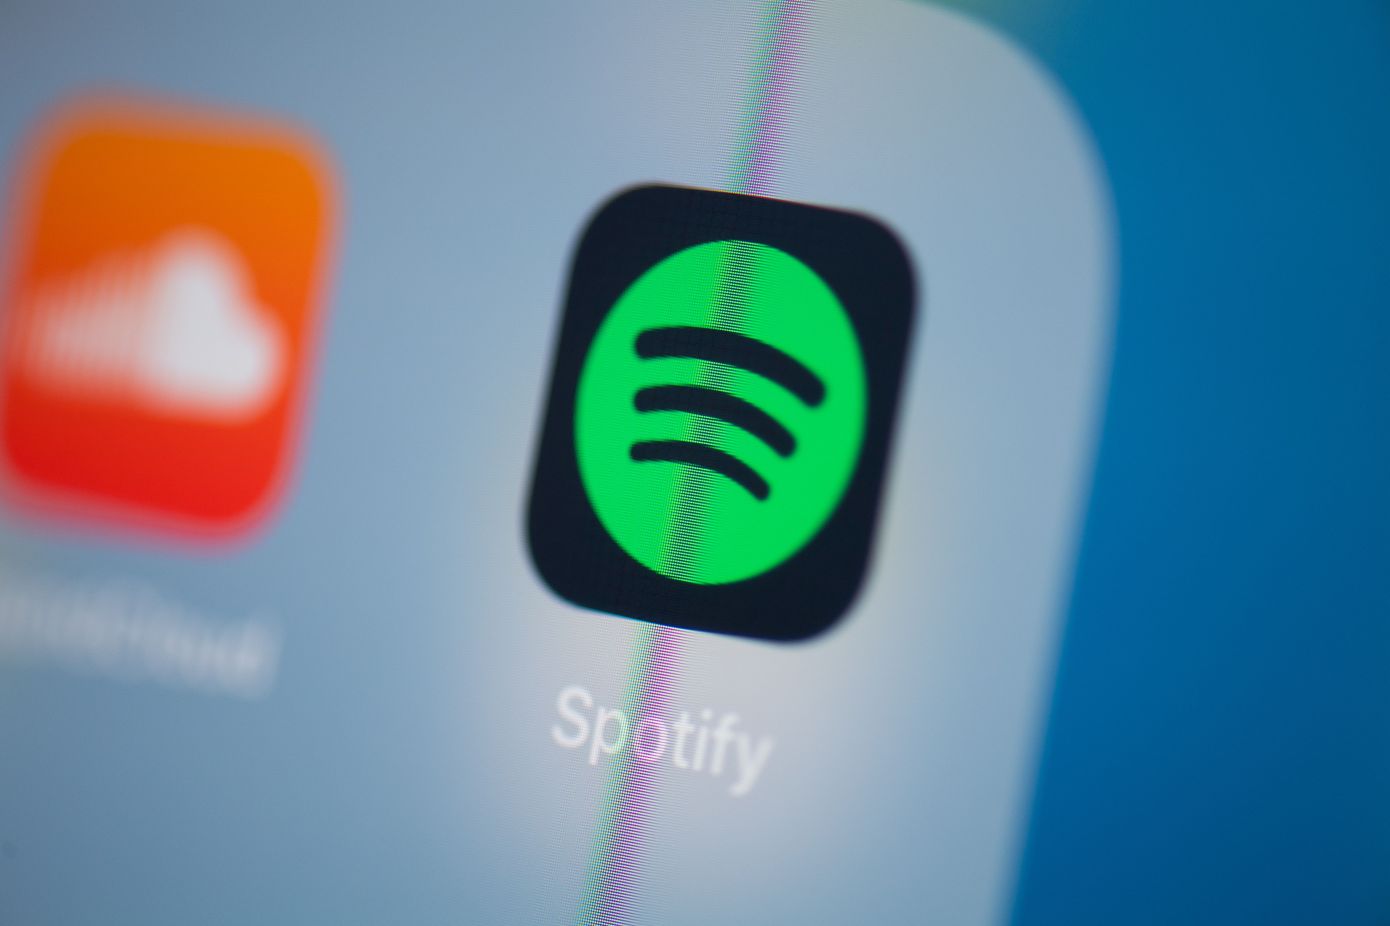 Spotify fined in Sweden over GDPR data access complaint